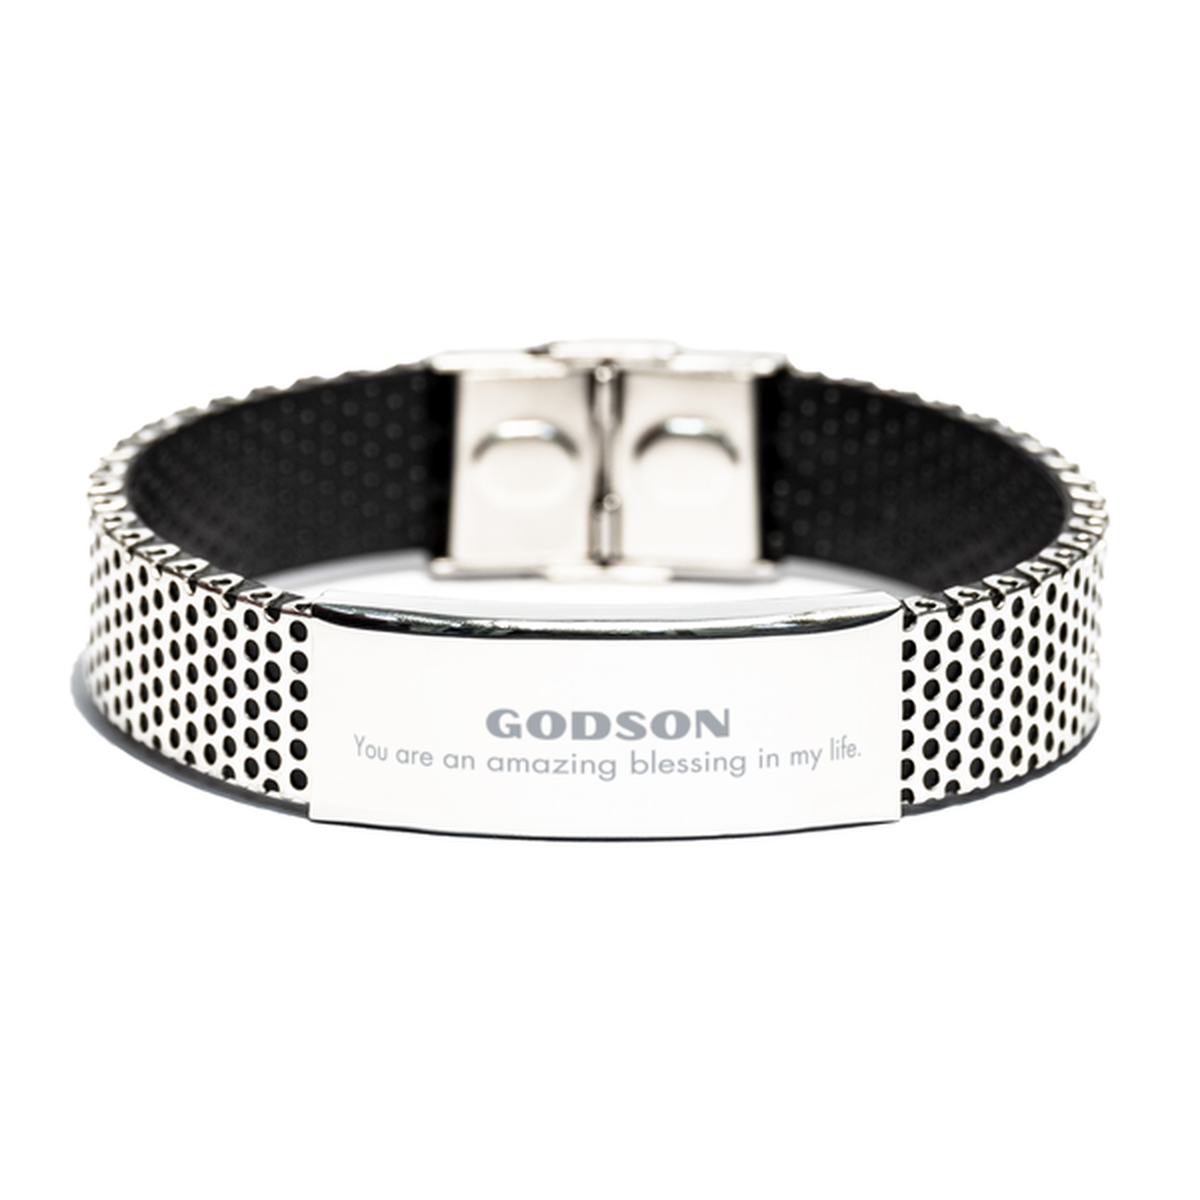 Godson Stainless Steel Bracelet, You are an amazing blessing in my life, Thank You Gifts For Godson, Inspirational Birthday Christmas Unique Gifts For Godson